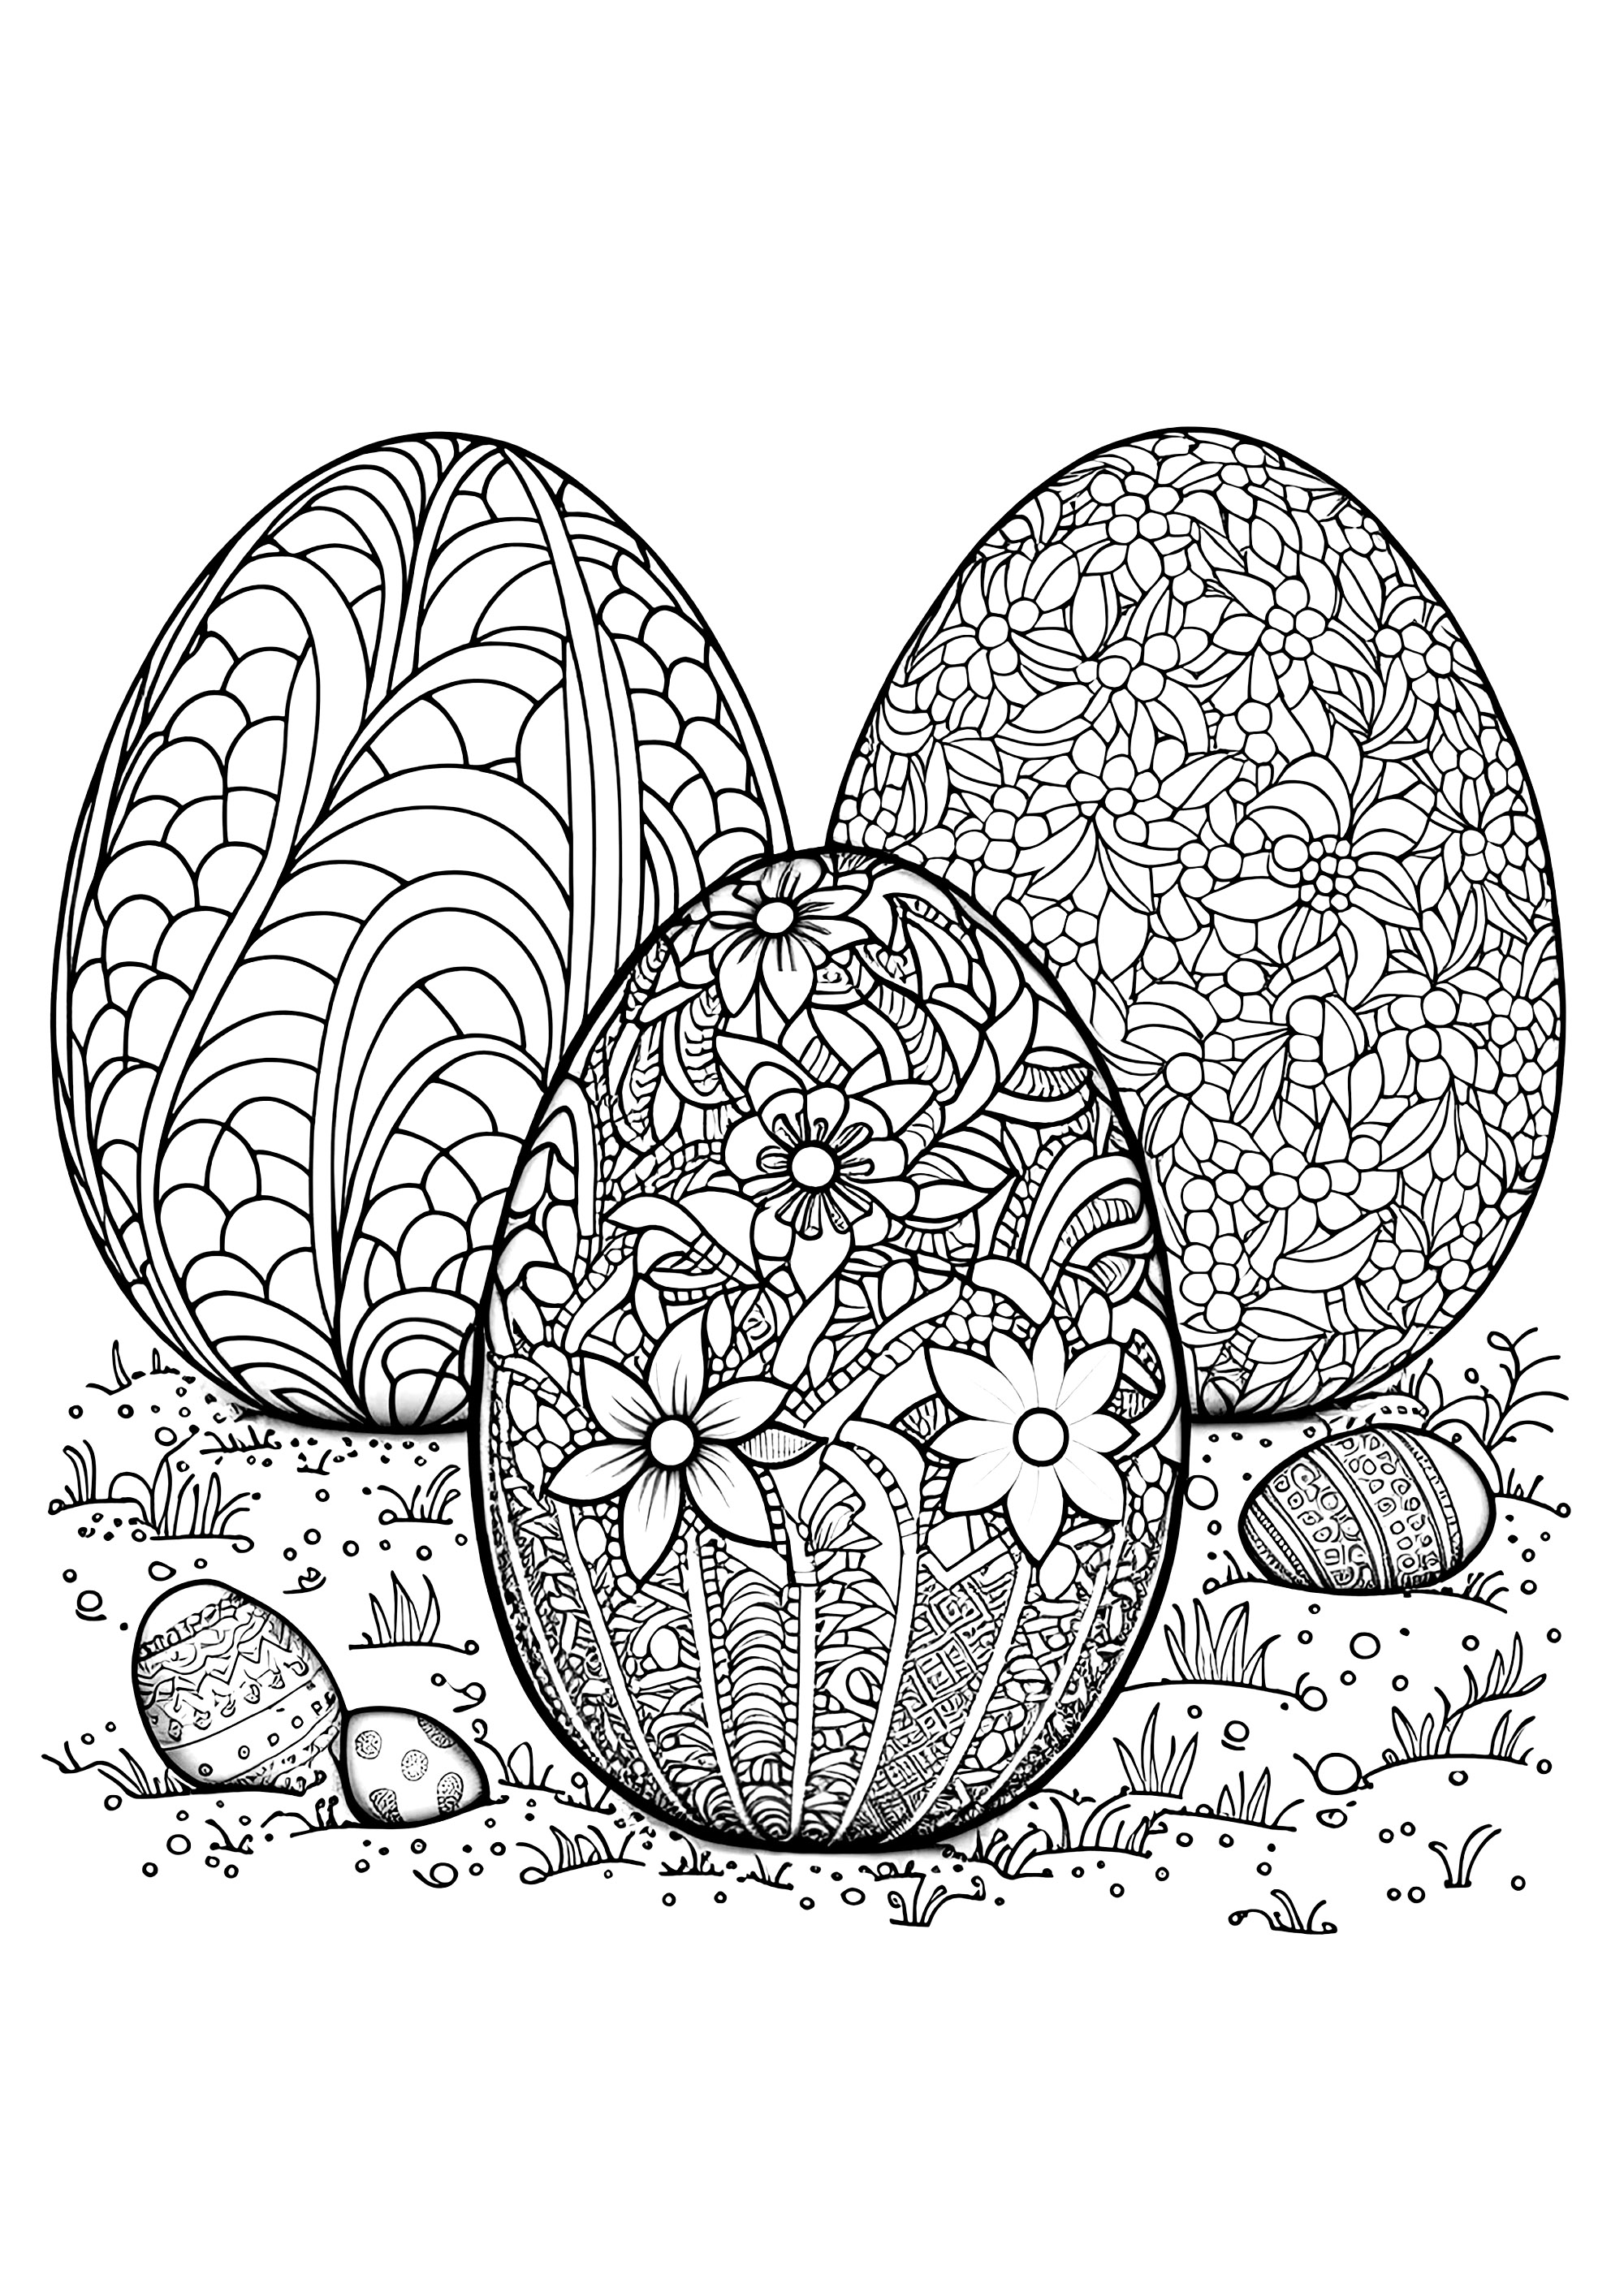 Three beautifully decorated Easter eggs to color